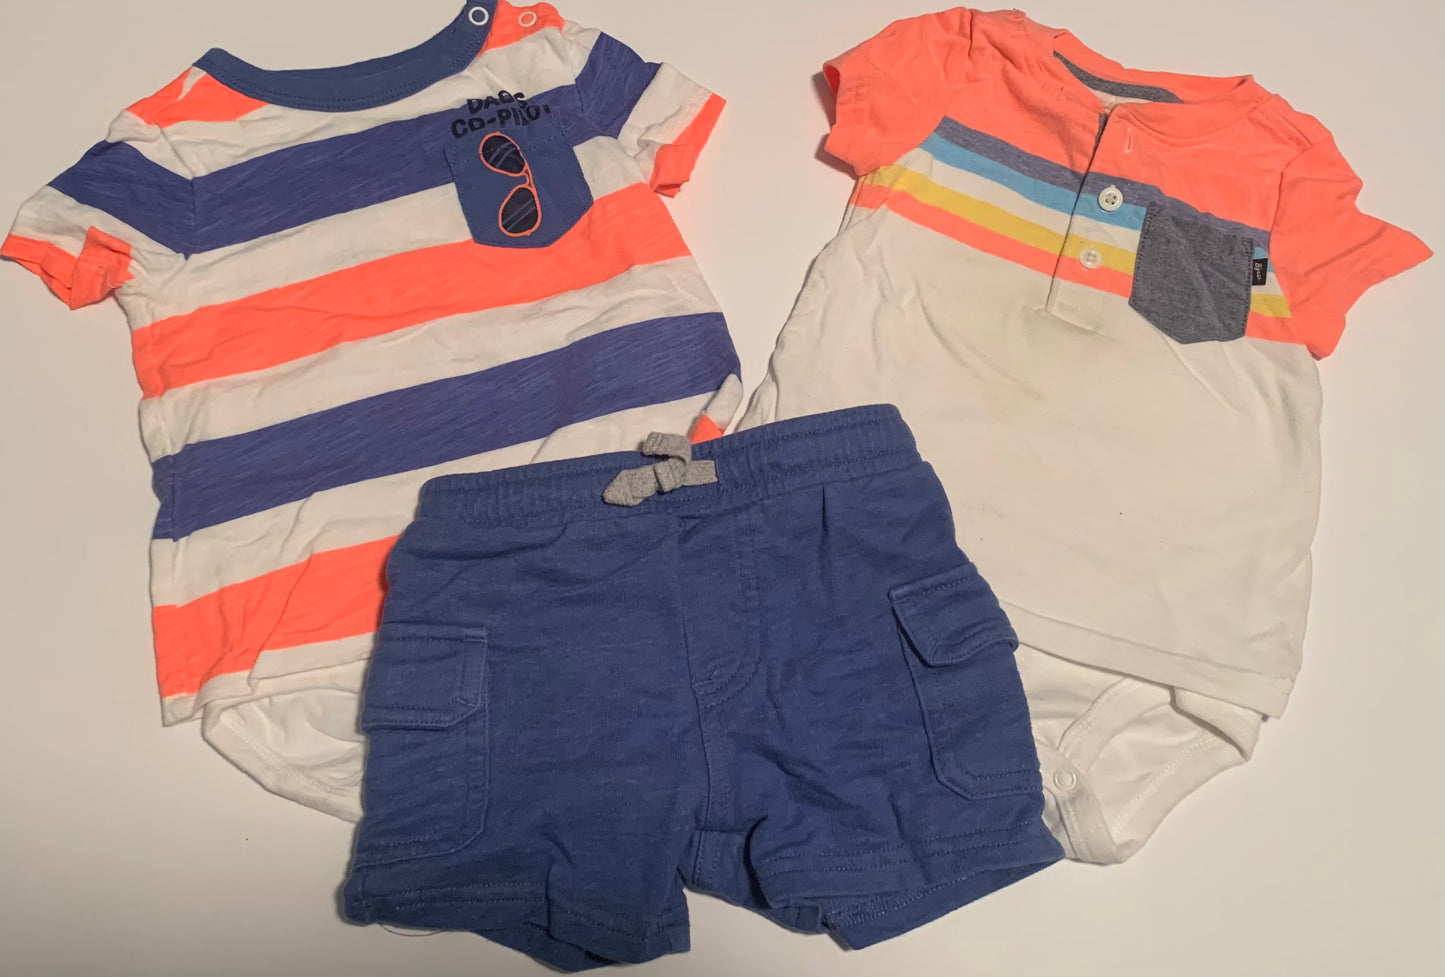 Boys 12 months shorts outfits- clothing lot bundle